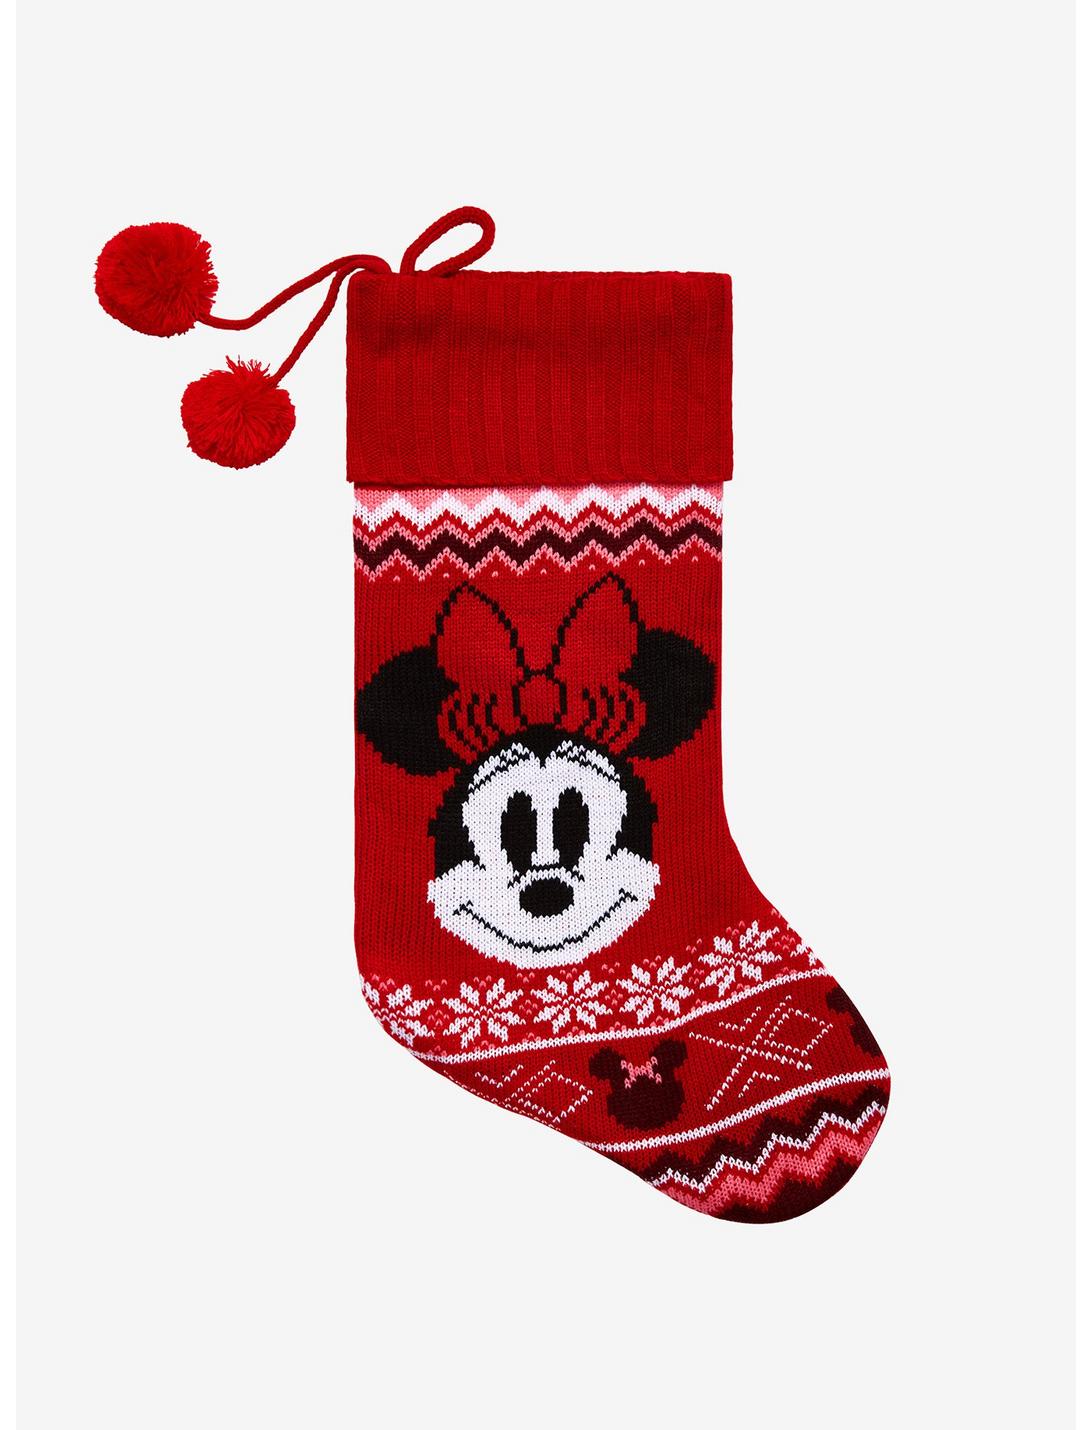 Disney Minnie Mouse Knit Stocking Hot Topic Exclusive, , hi-res